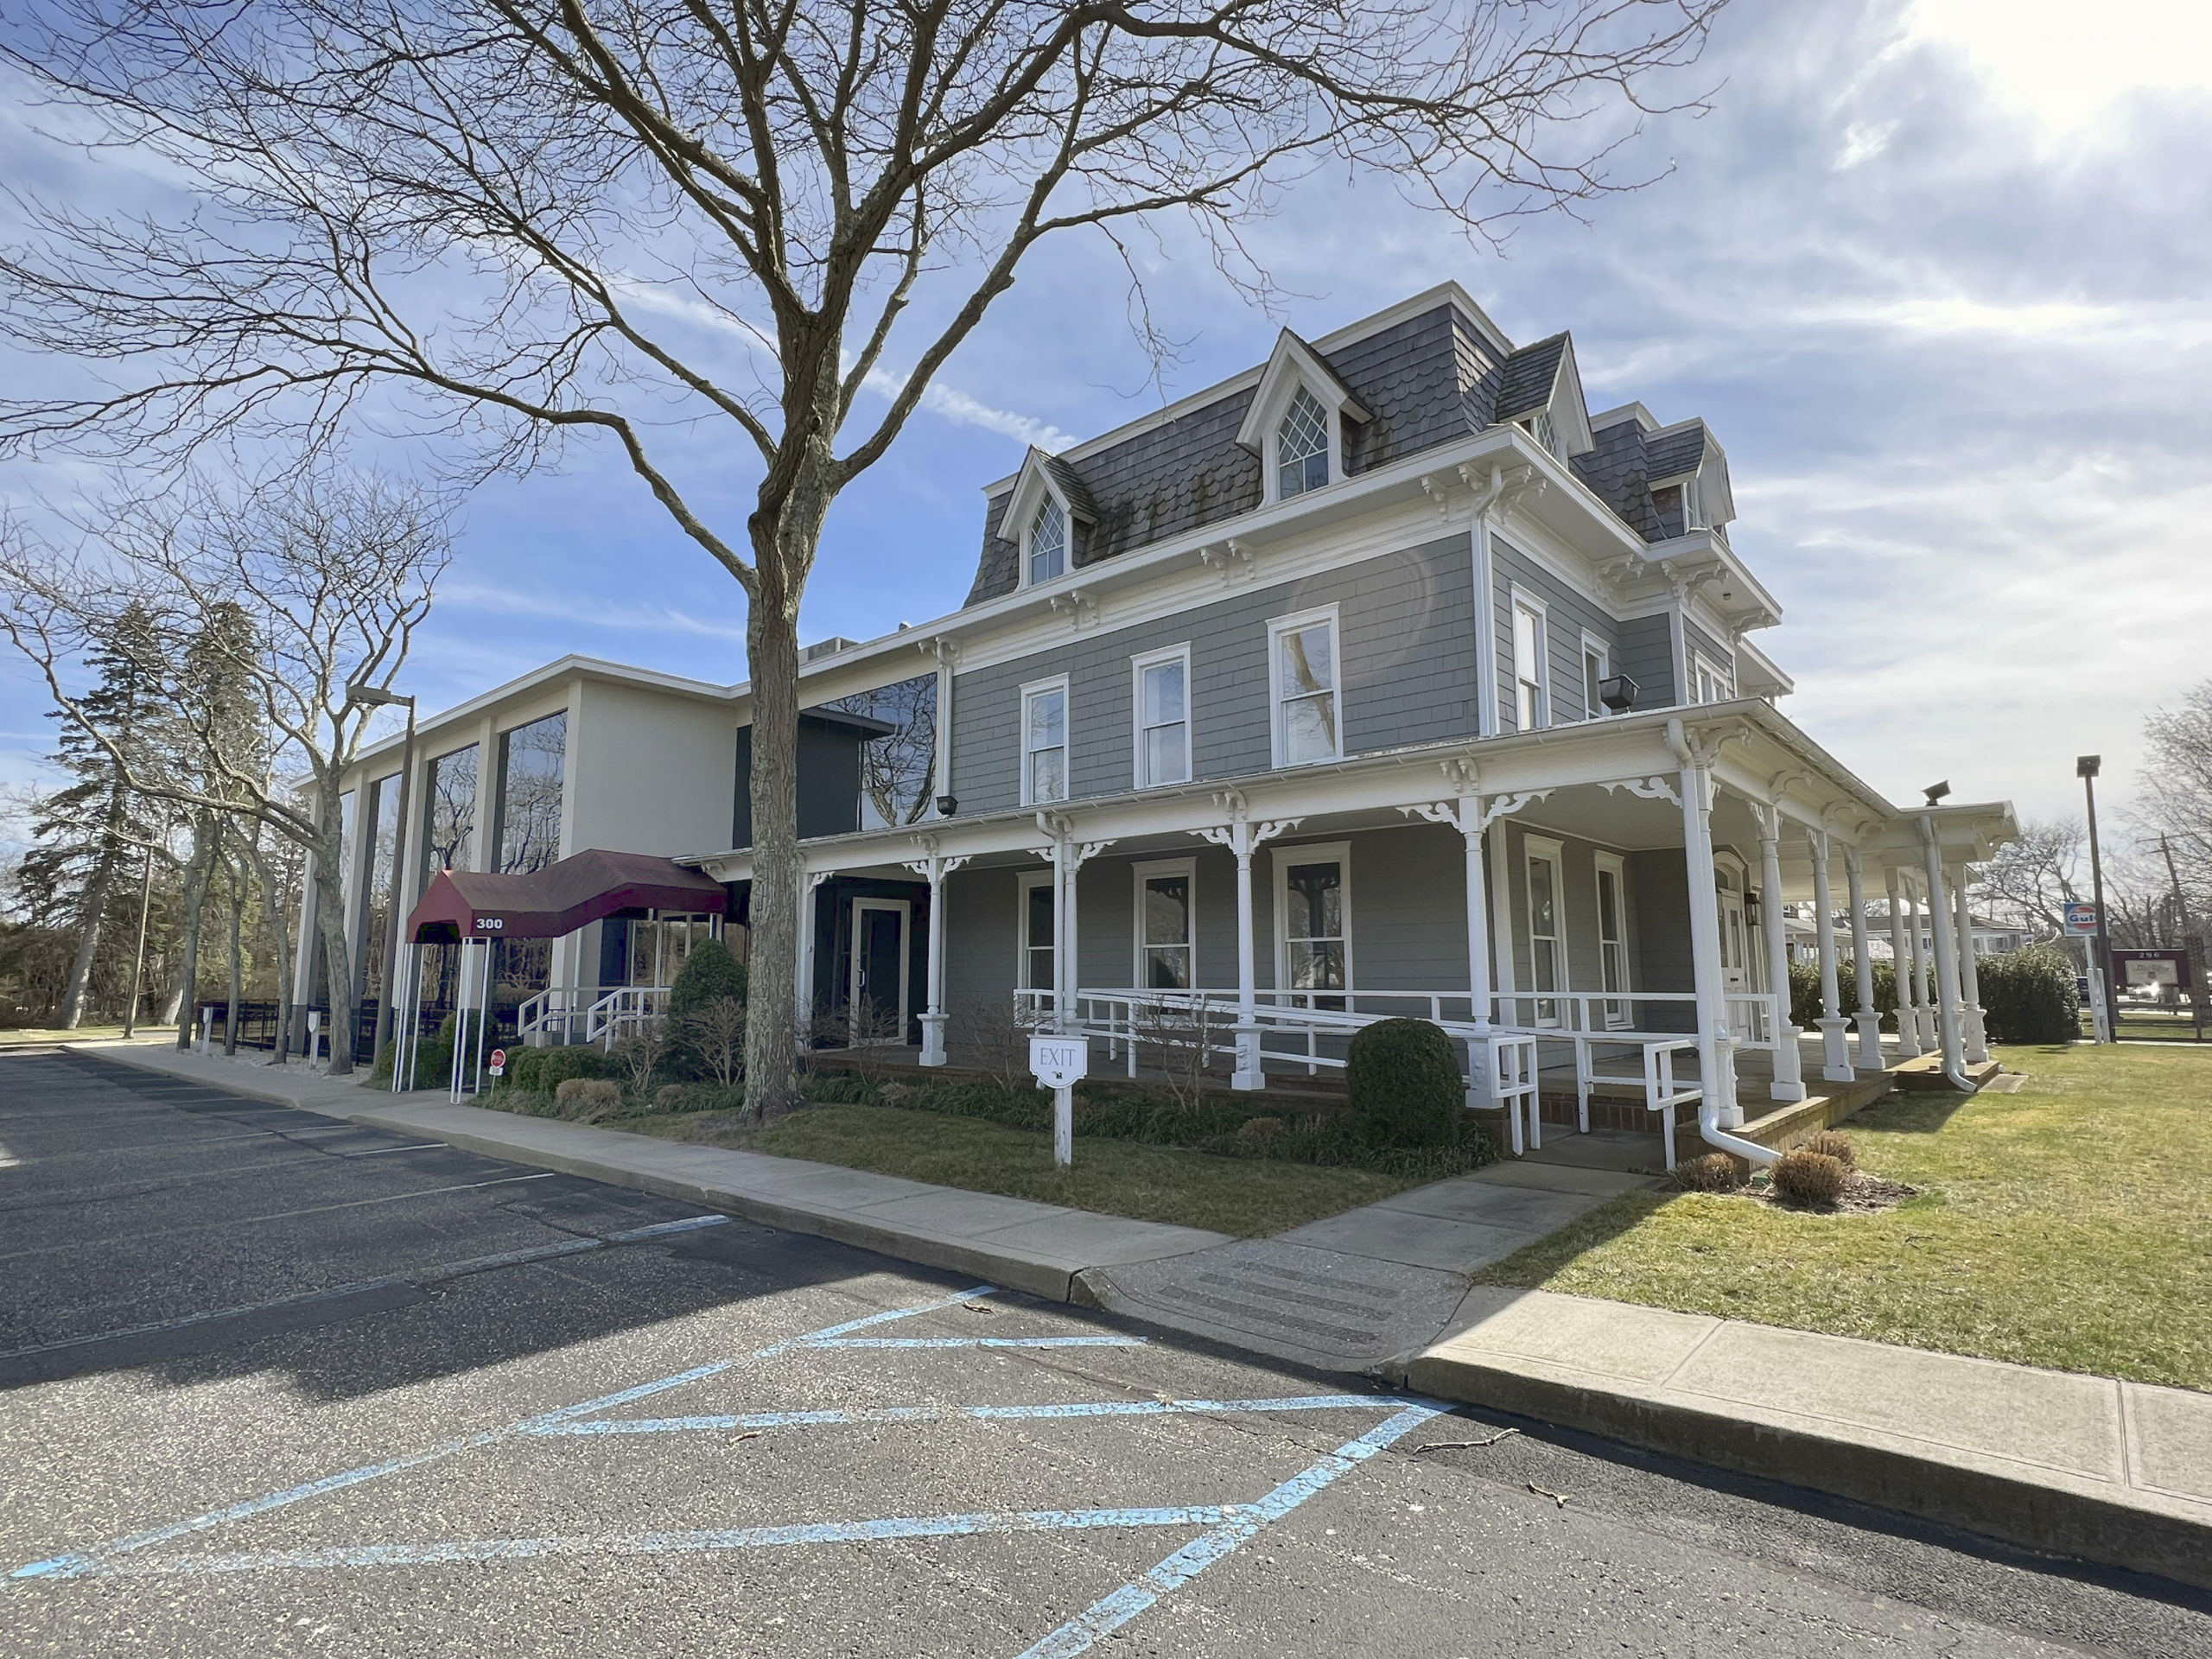 The Southampton Union Free School District will renovate its new district office building, located at 300-310 Hampton Road in Southampton. DANA SHAW